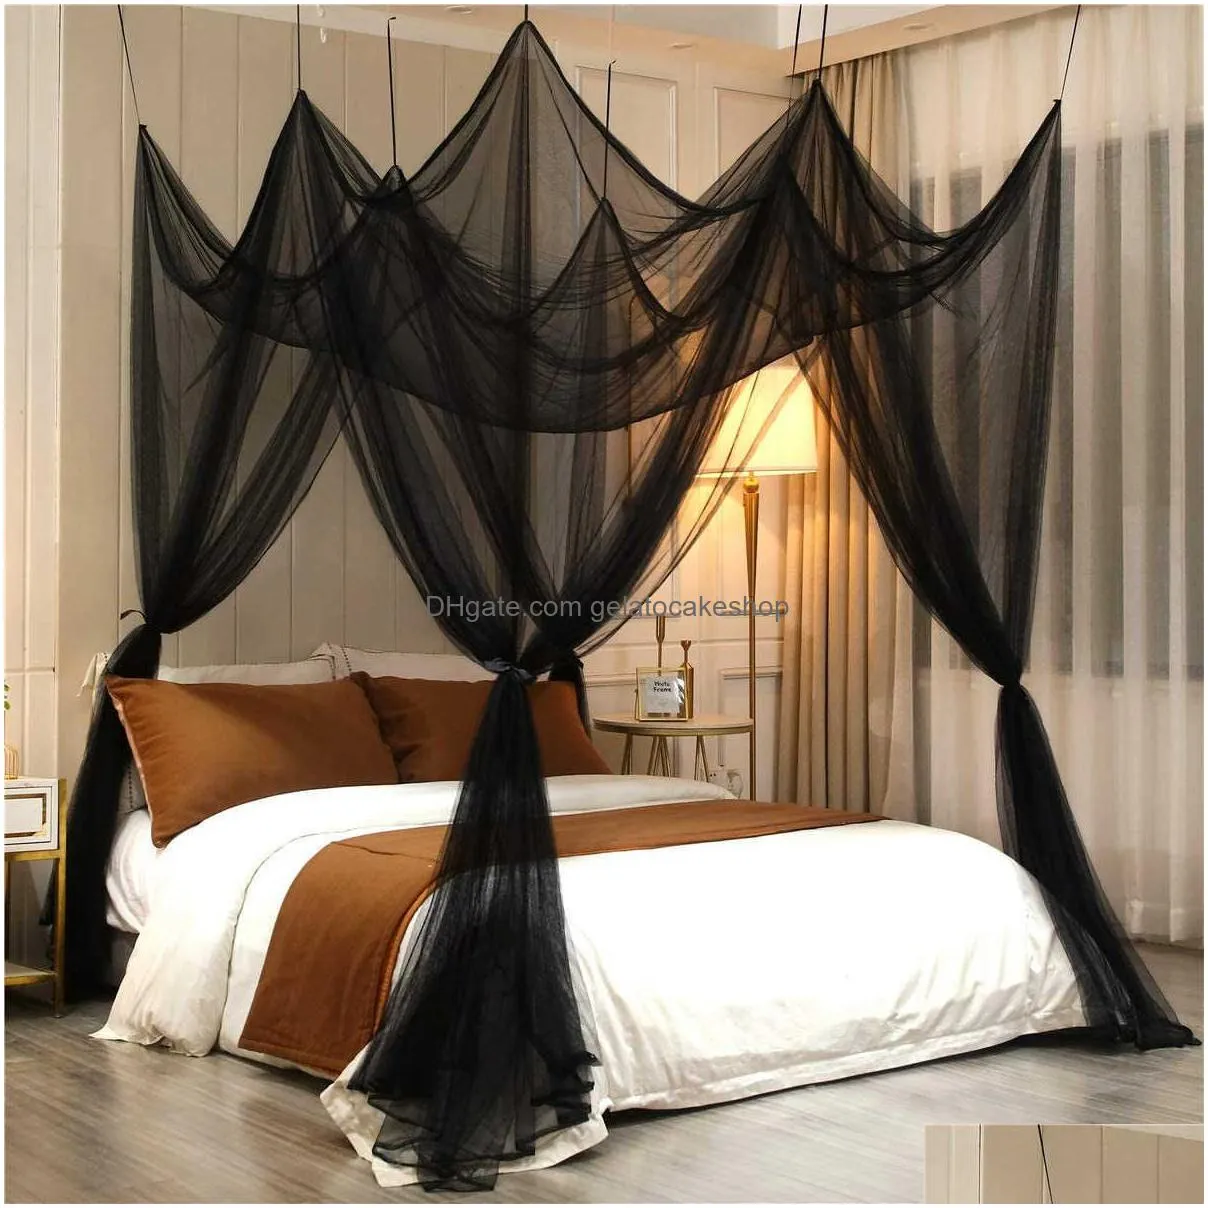  8 corner post canopy bed curtains elegant camping tent mosquito net for bed canopy screen netting full/queen/king